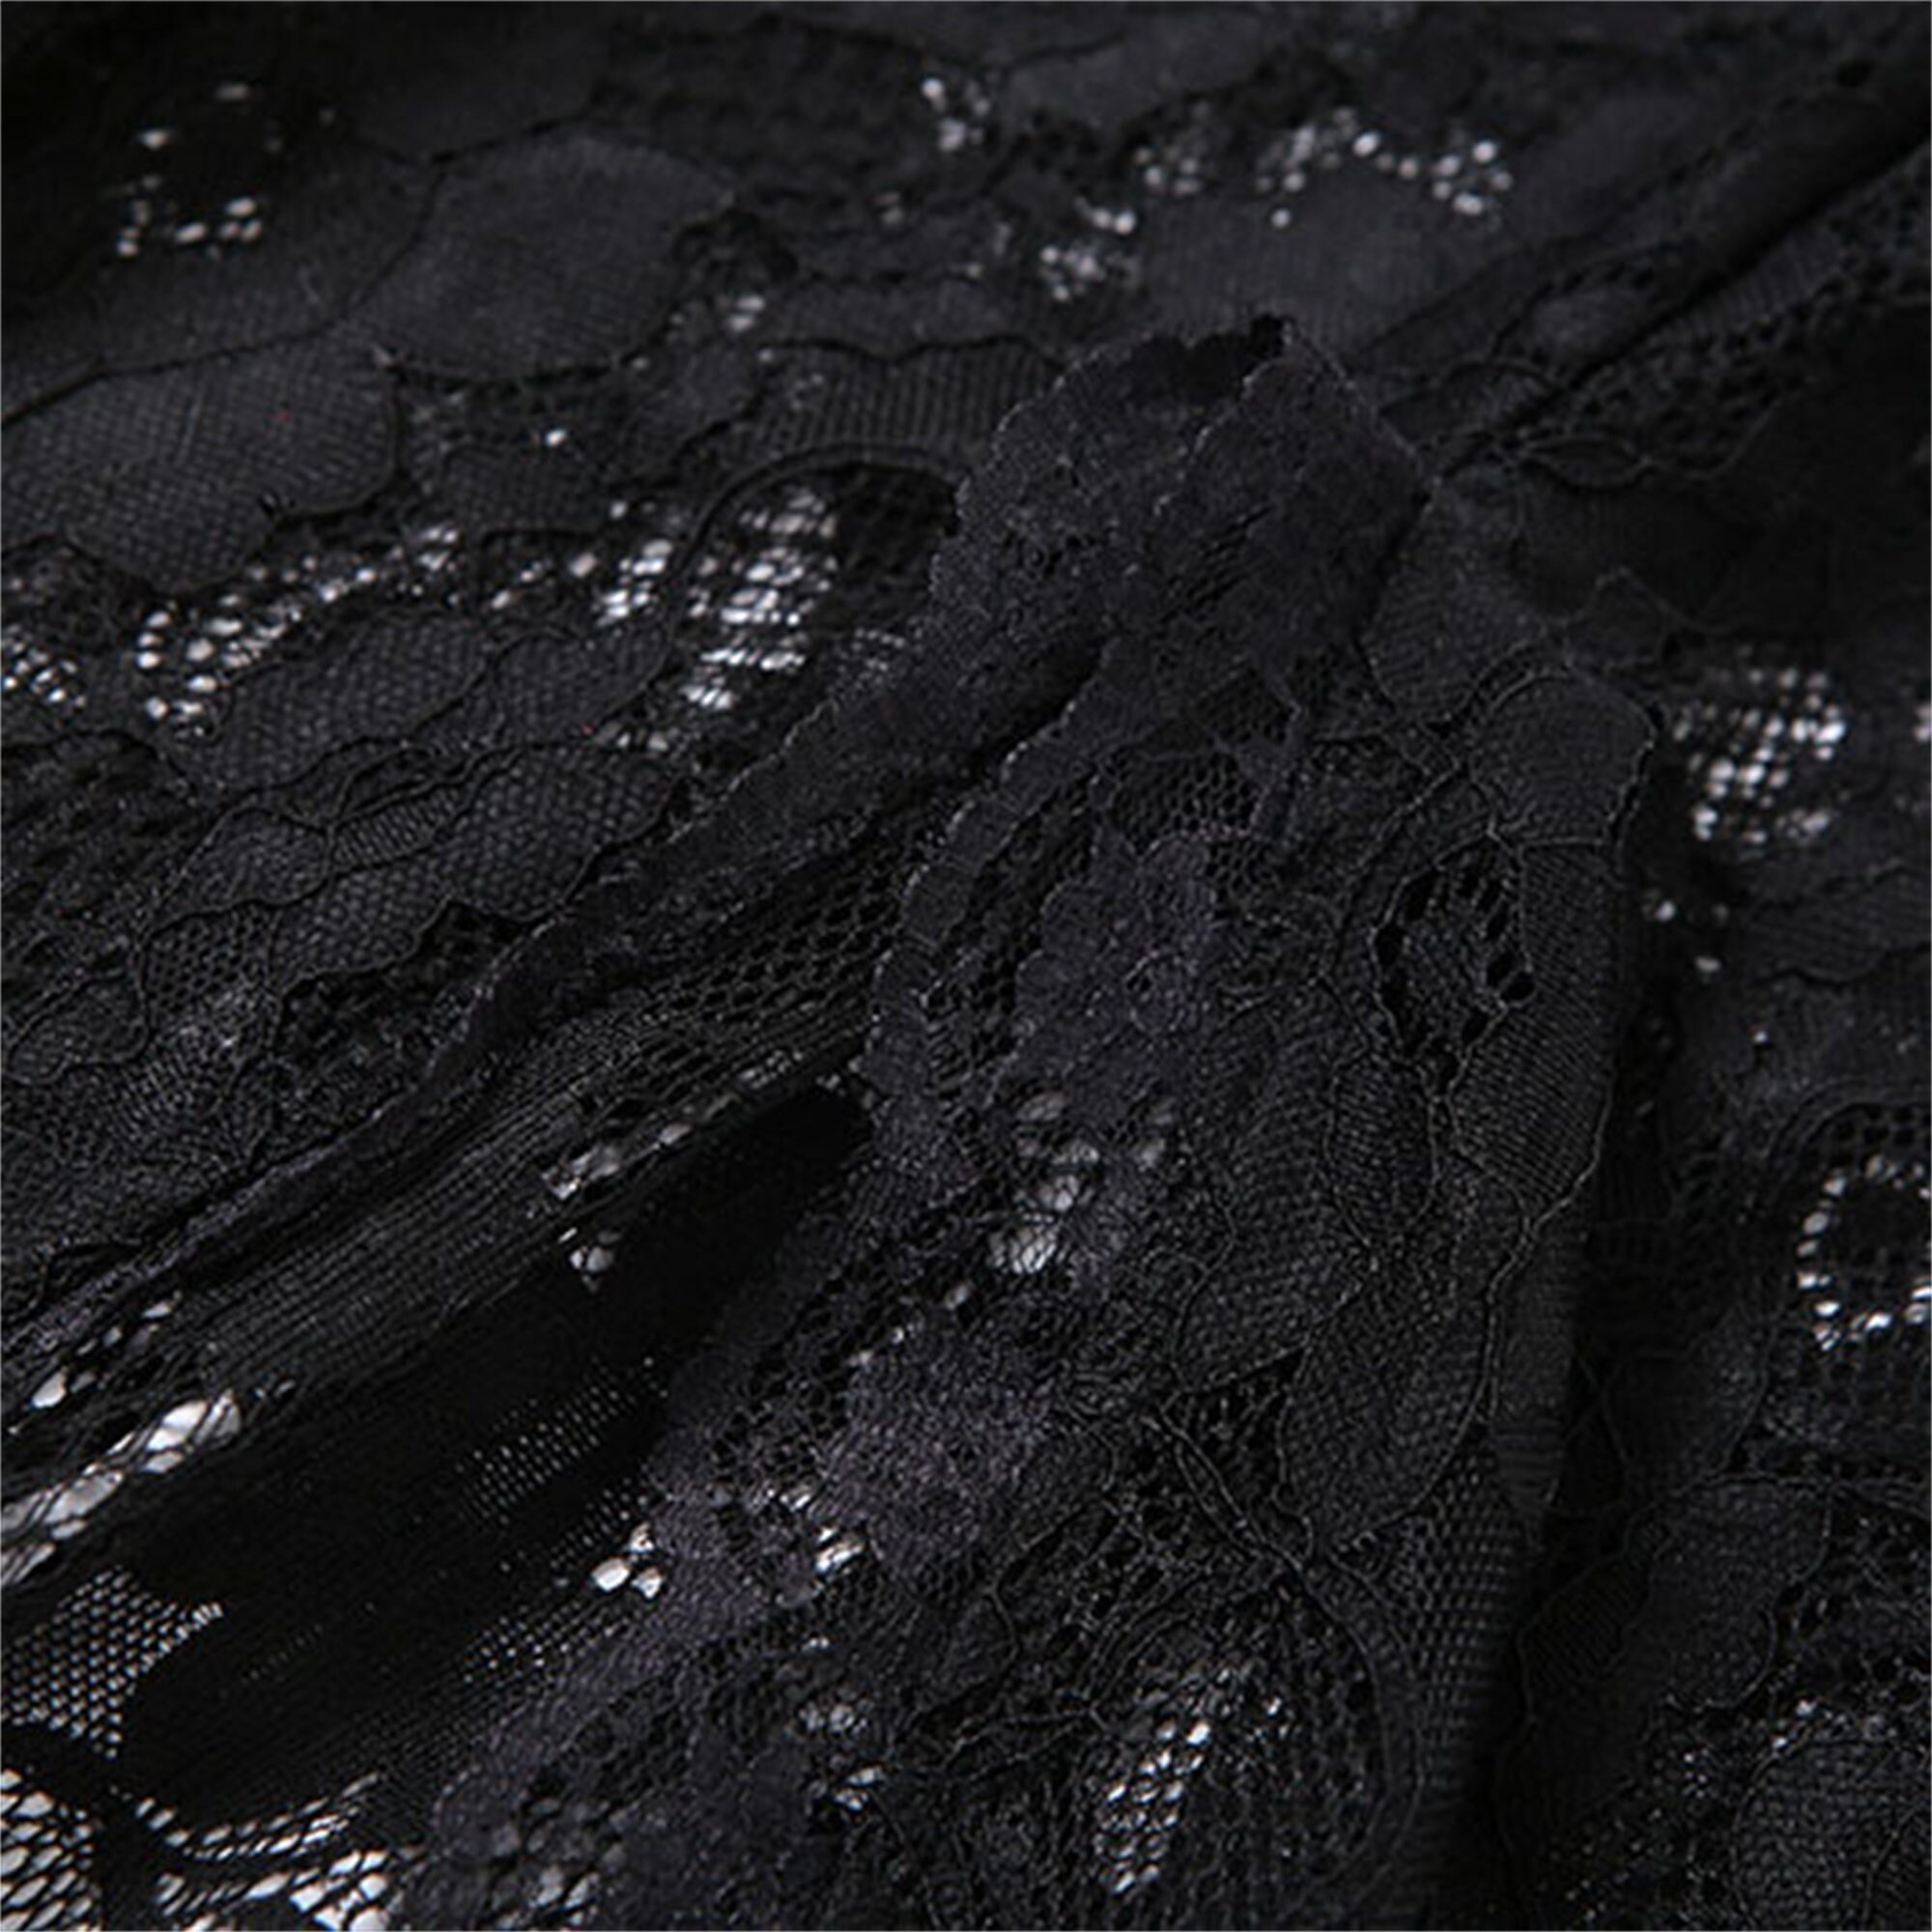 Goth Sexy Rose Lace Dress Hollow Perspective Dress Gothic Lace Slim Fit Mermaid Dress Long Sleeved Vintage Victorian Dress Graduation Dress